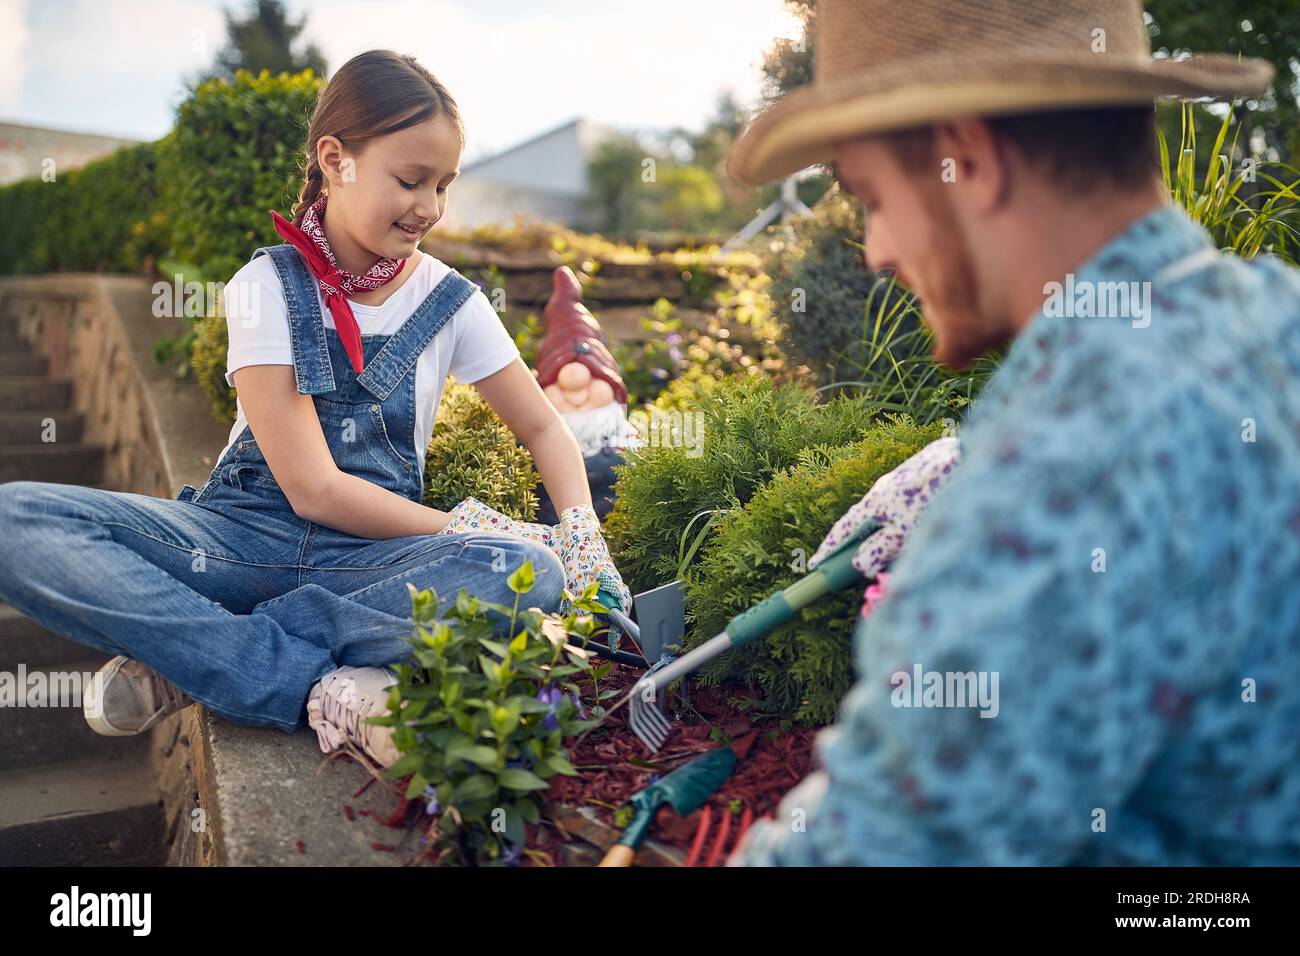 Beautiful young girl using garden rake sitting by the garden outdoors planting flowers with her father on a sunny summer day. Home, lifestyle, family Stock Photo